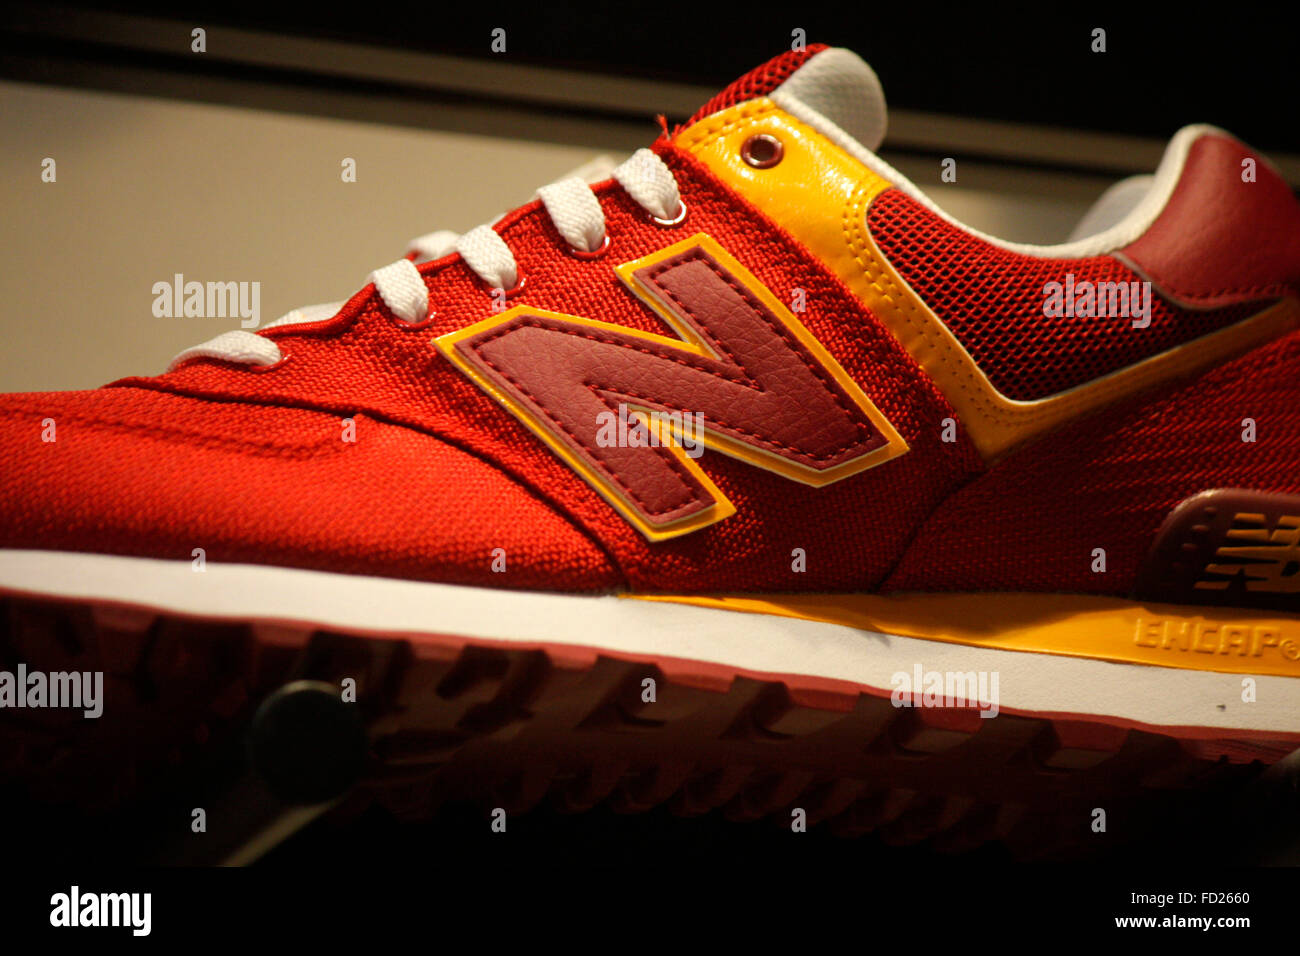 New Balance Logo High Resolution Stock Photography and Images - Alamy